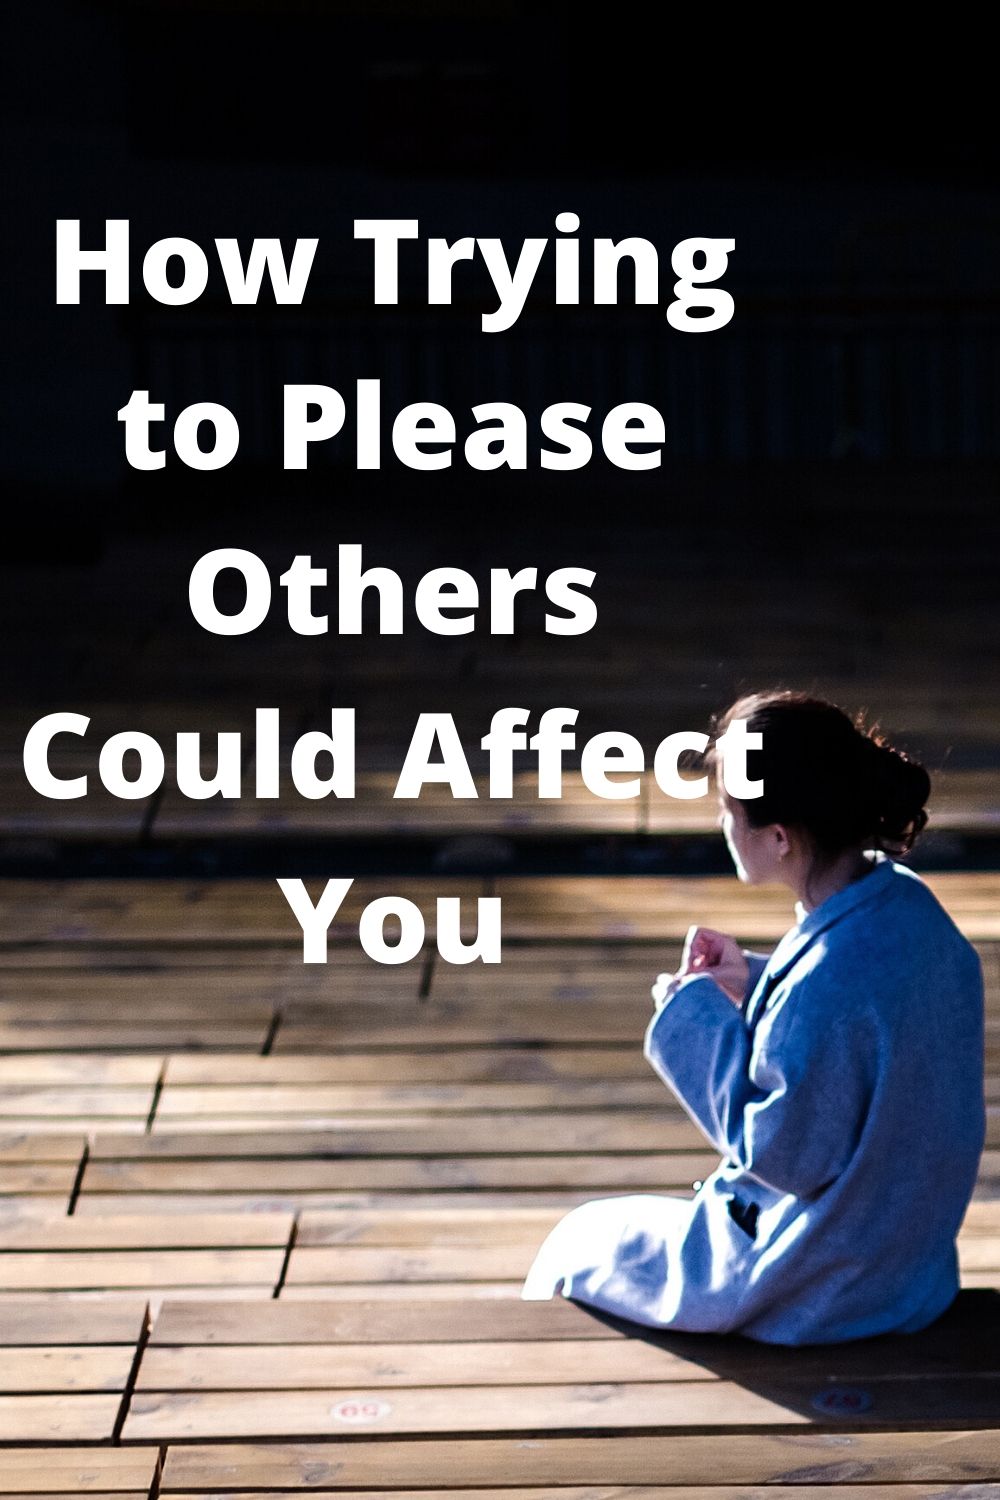 Please: How Trying to Please Others Could Affect You